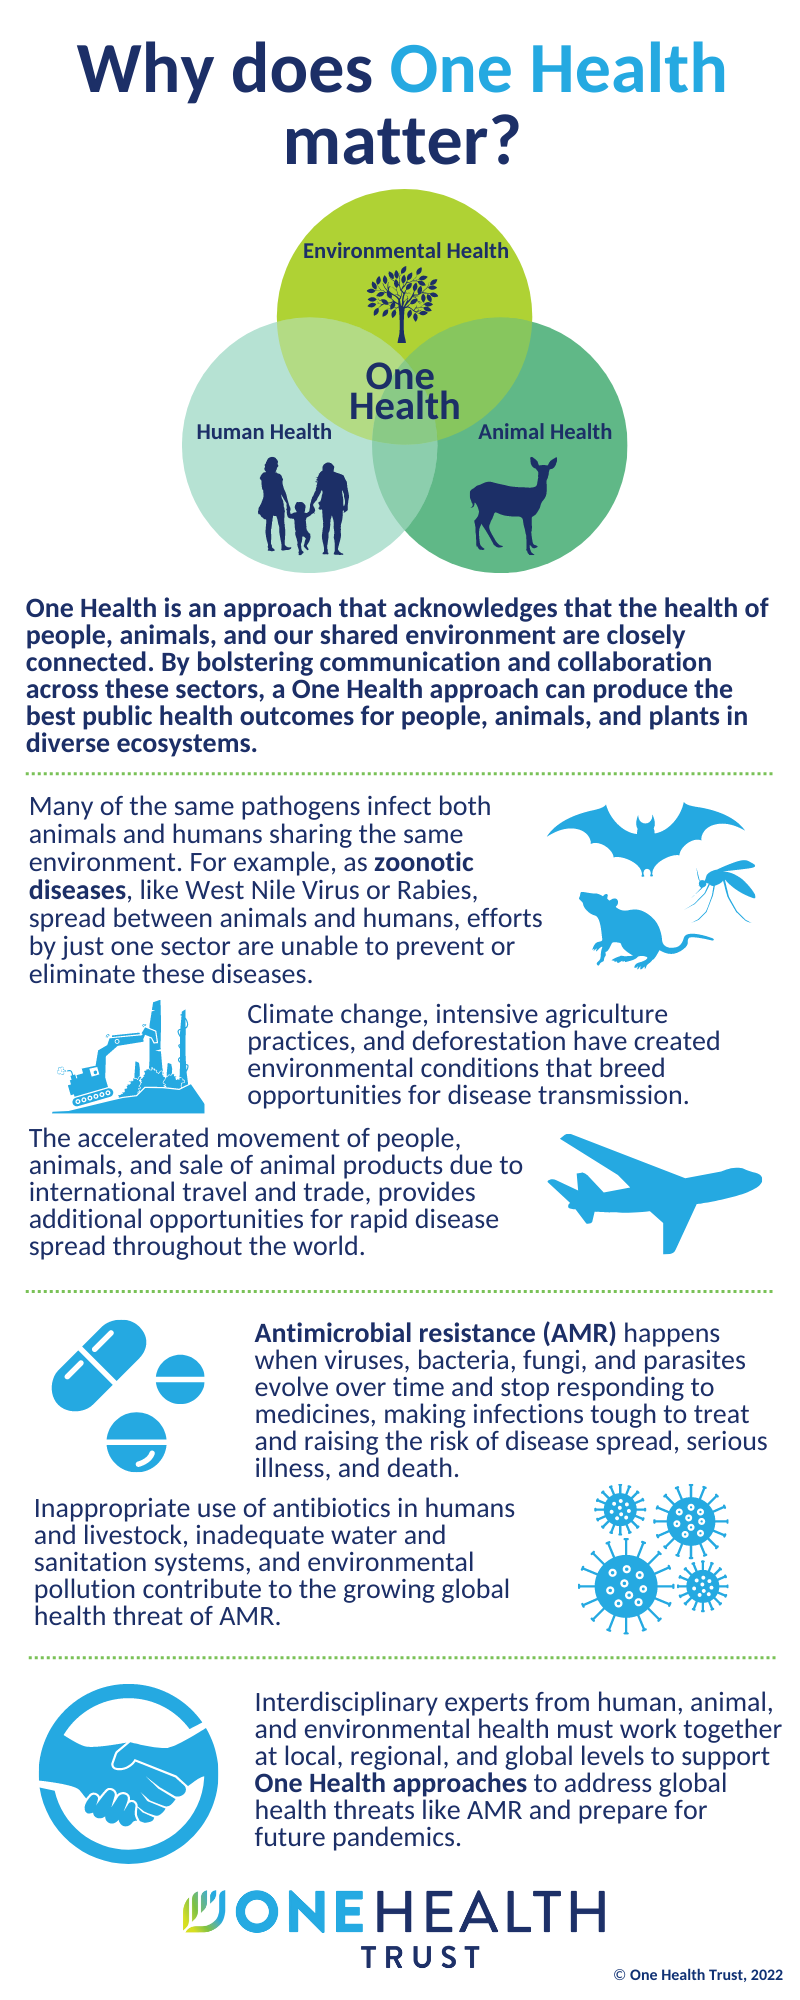 An infographic explaining how One Health, an approach where the health of people, animals, and their shared environment are closely connected, can improve public health outcomes for people, animals, and plants in diverse ecosystems.